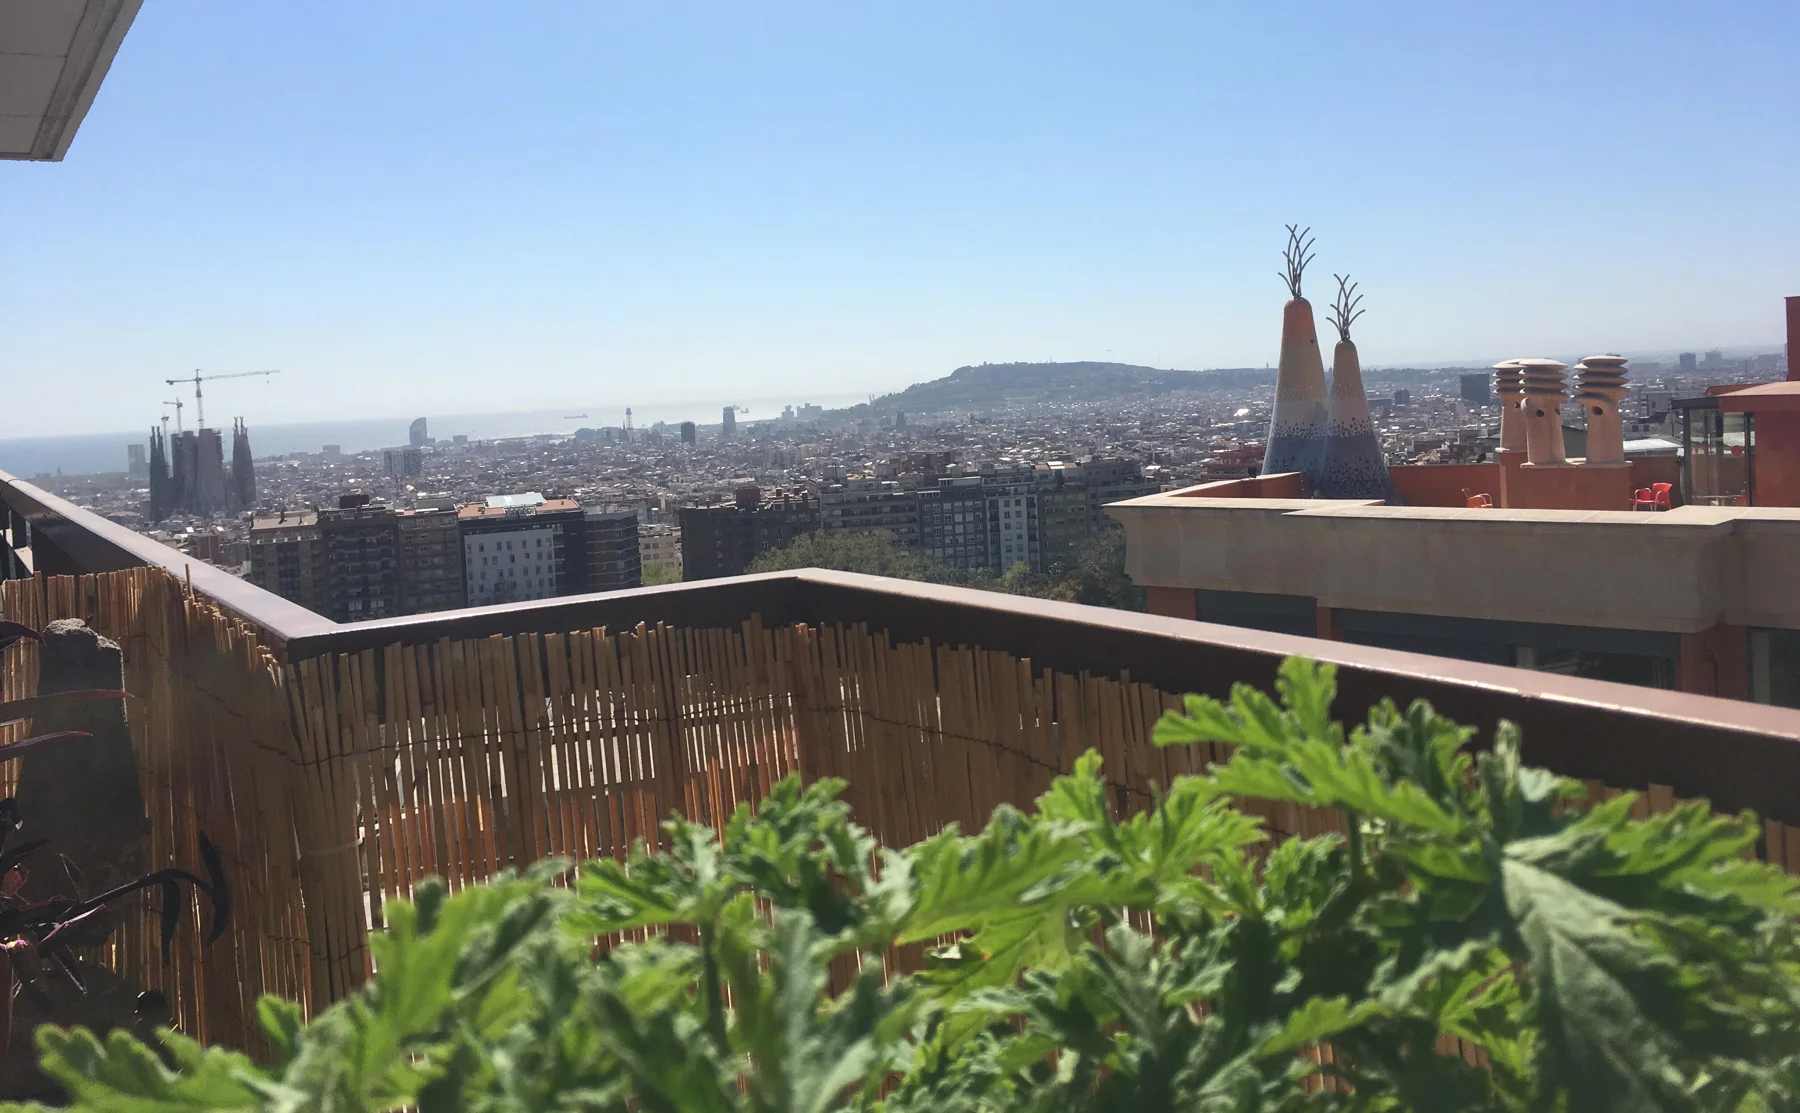 Vegetarian bistronomy tasting menu with a view in Barcelona - 1195784